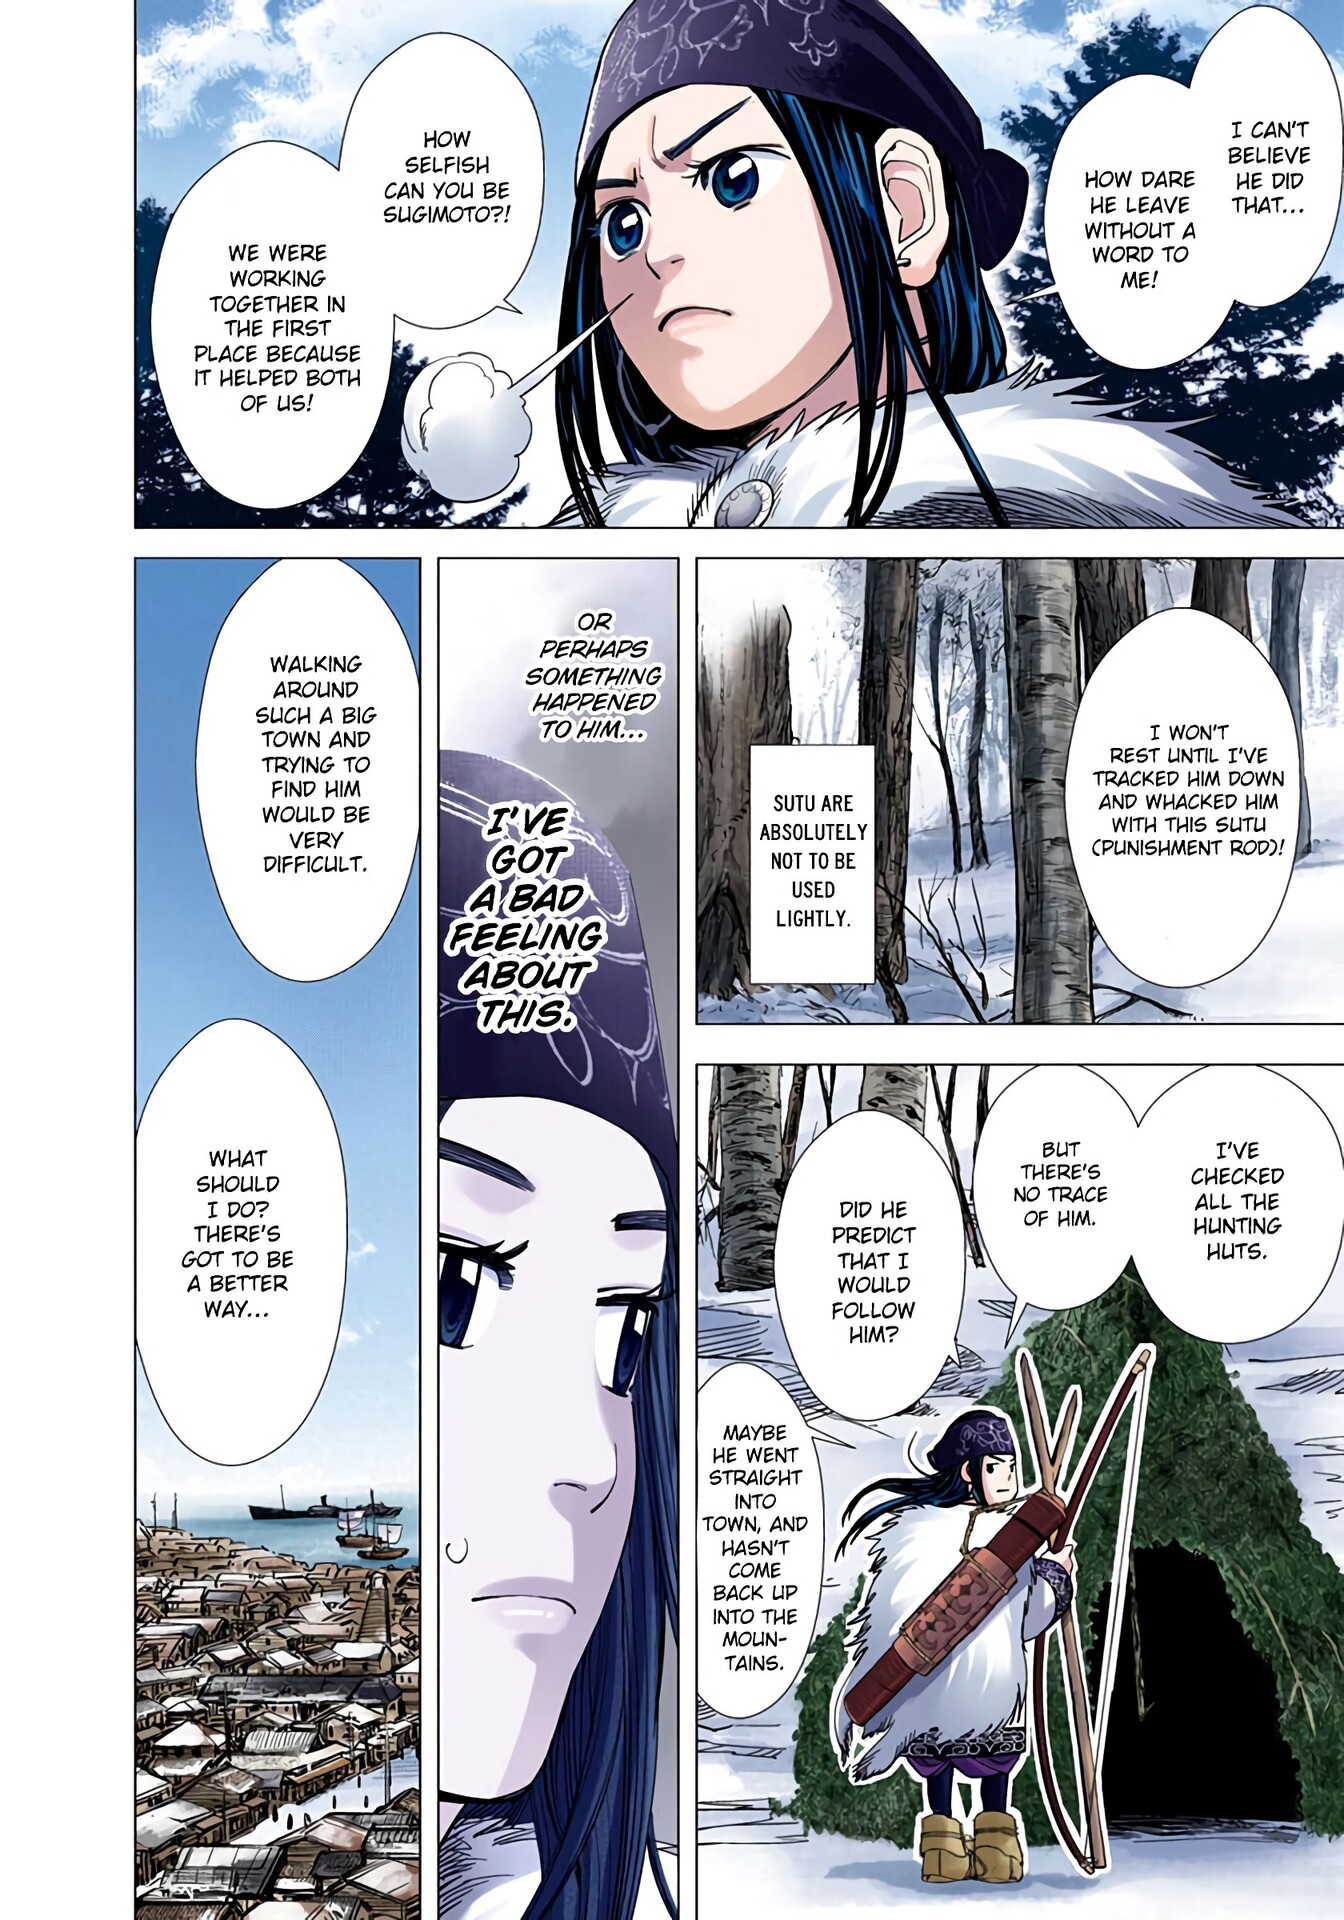 Golden Kamuy - Digital Colored Comics - Page 2